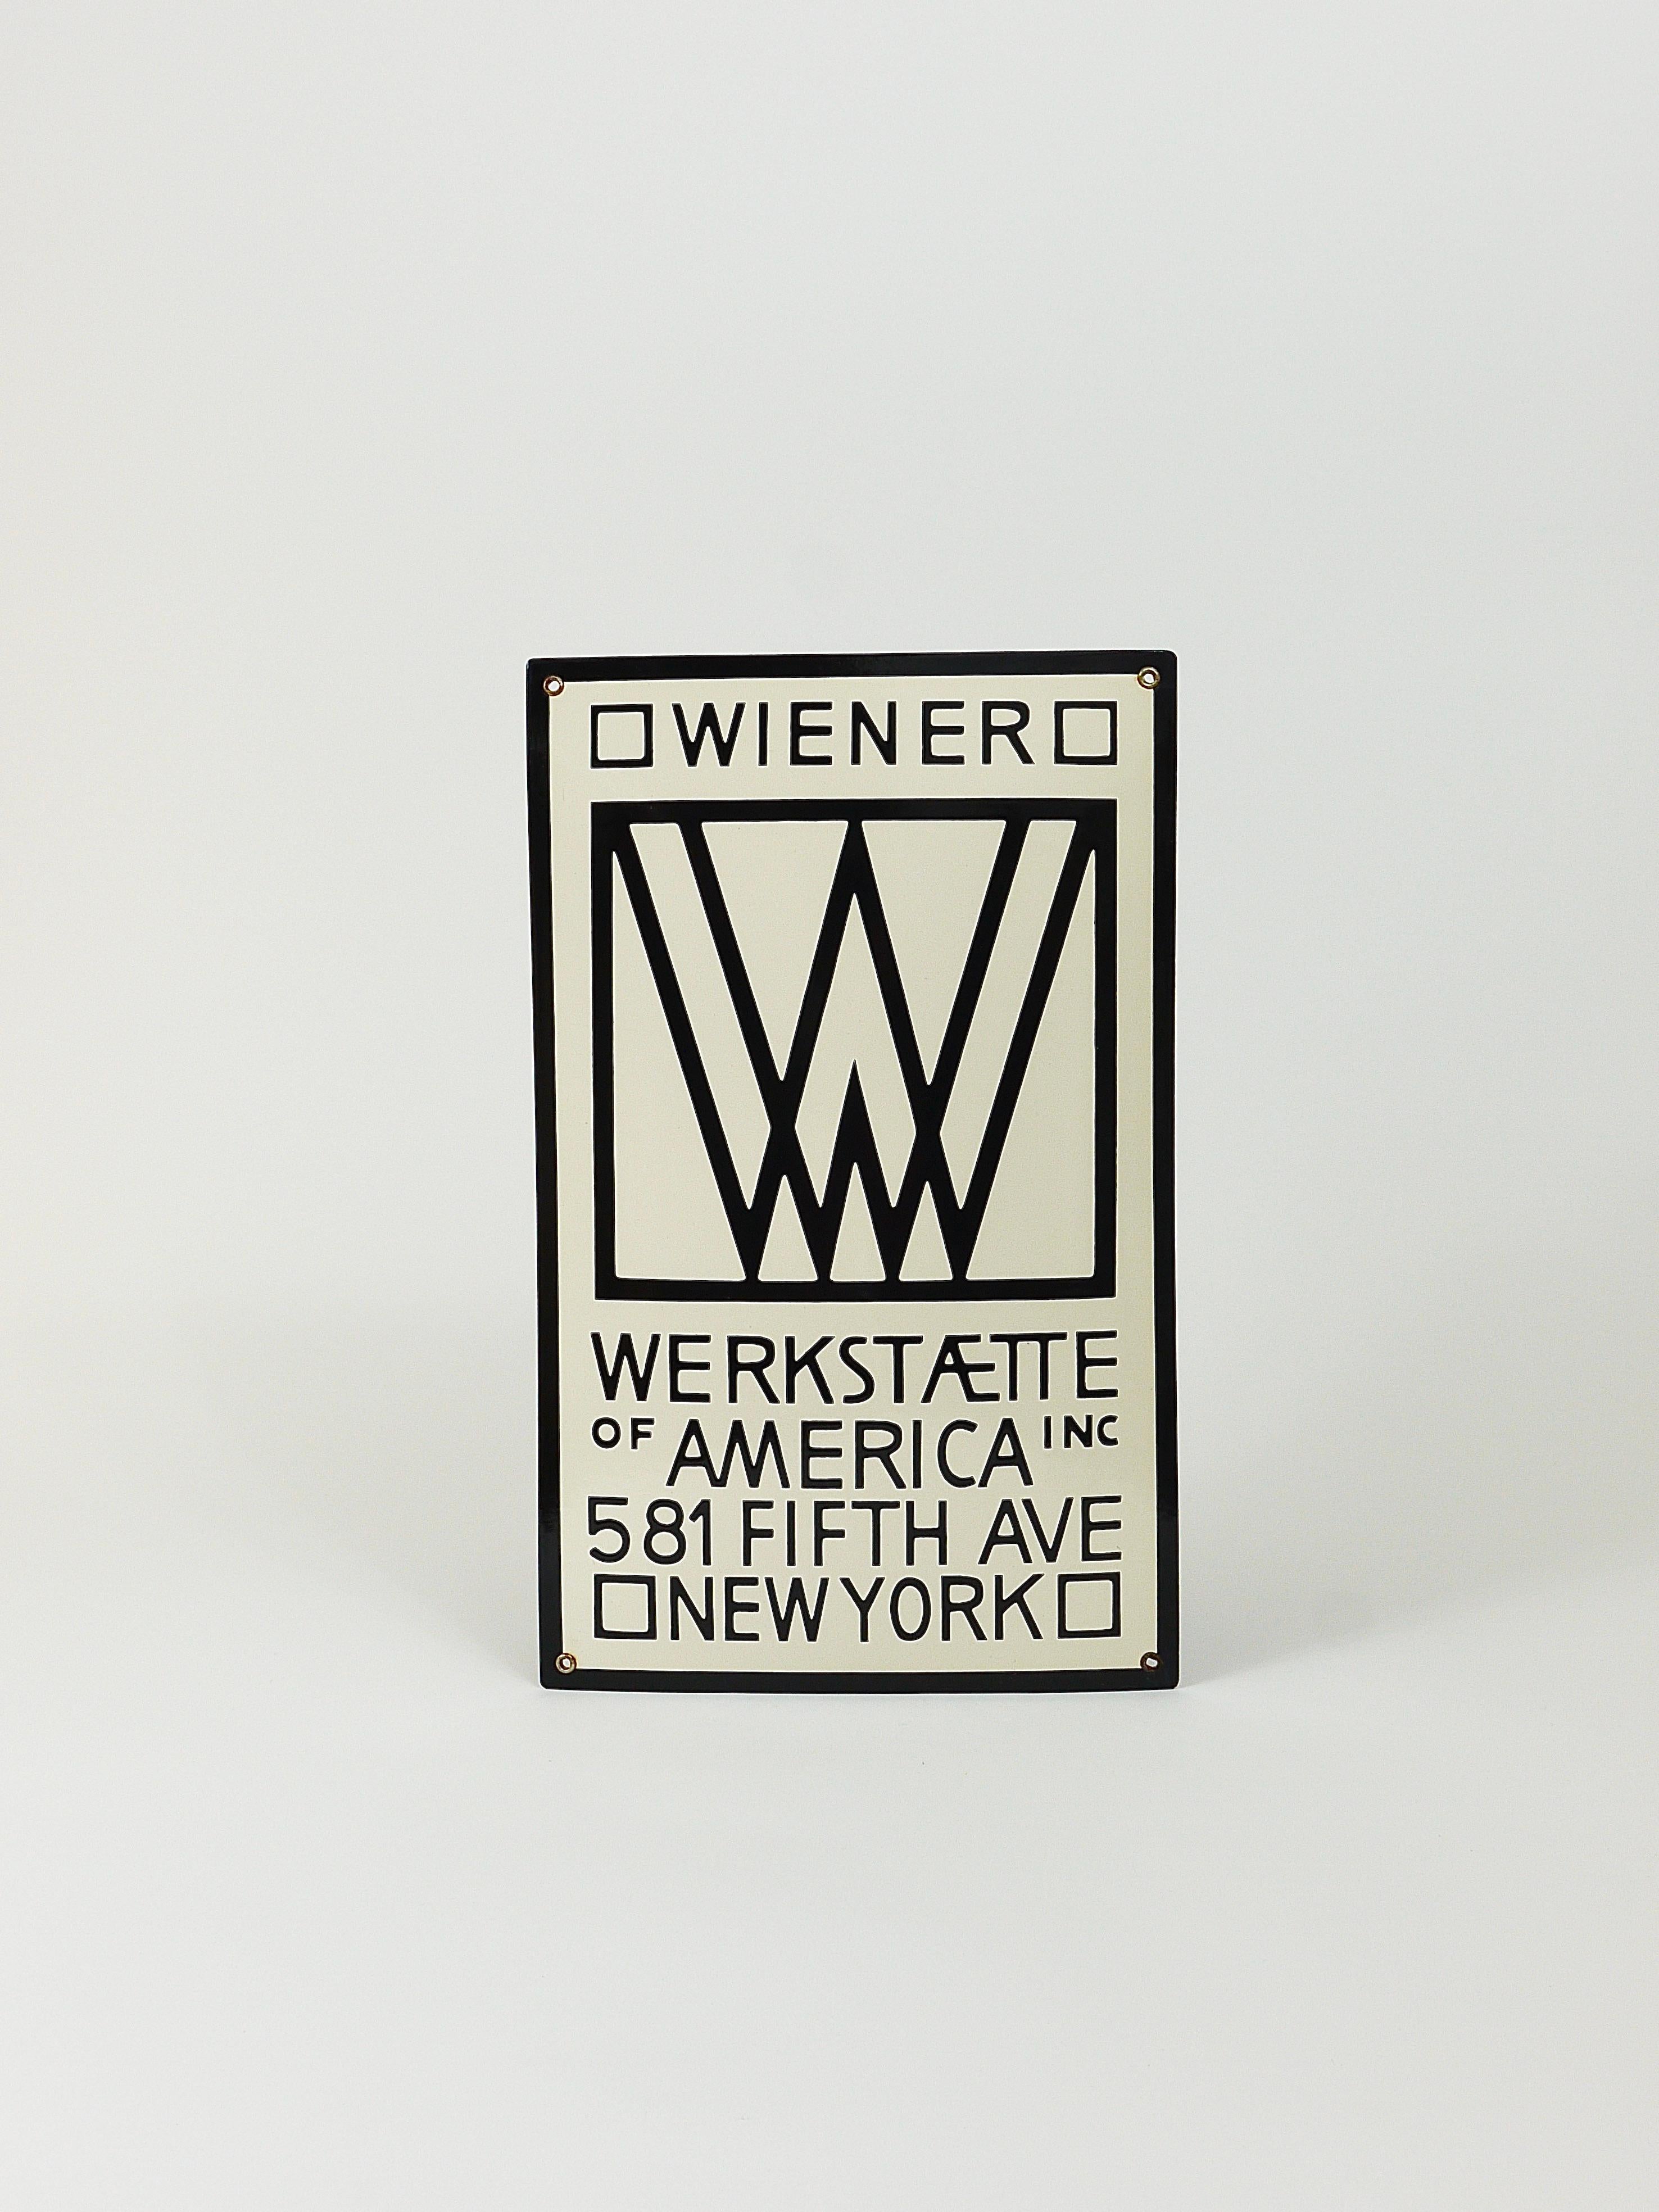 A rare, domed, black and white enameled Art Nouveau advertising sign for Wiener Werkstatte. (founded by Josef Hoffmann, Koloman Moser and Fritz Waerndorfer in 1903 in Vienna)

Wiener Werkstaette of America Inc 581 Fifth Ave New York

Designed in